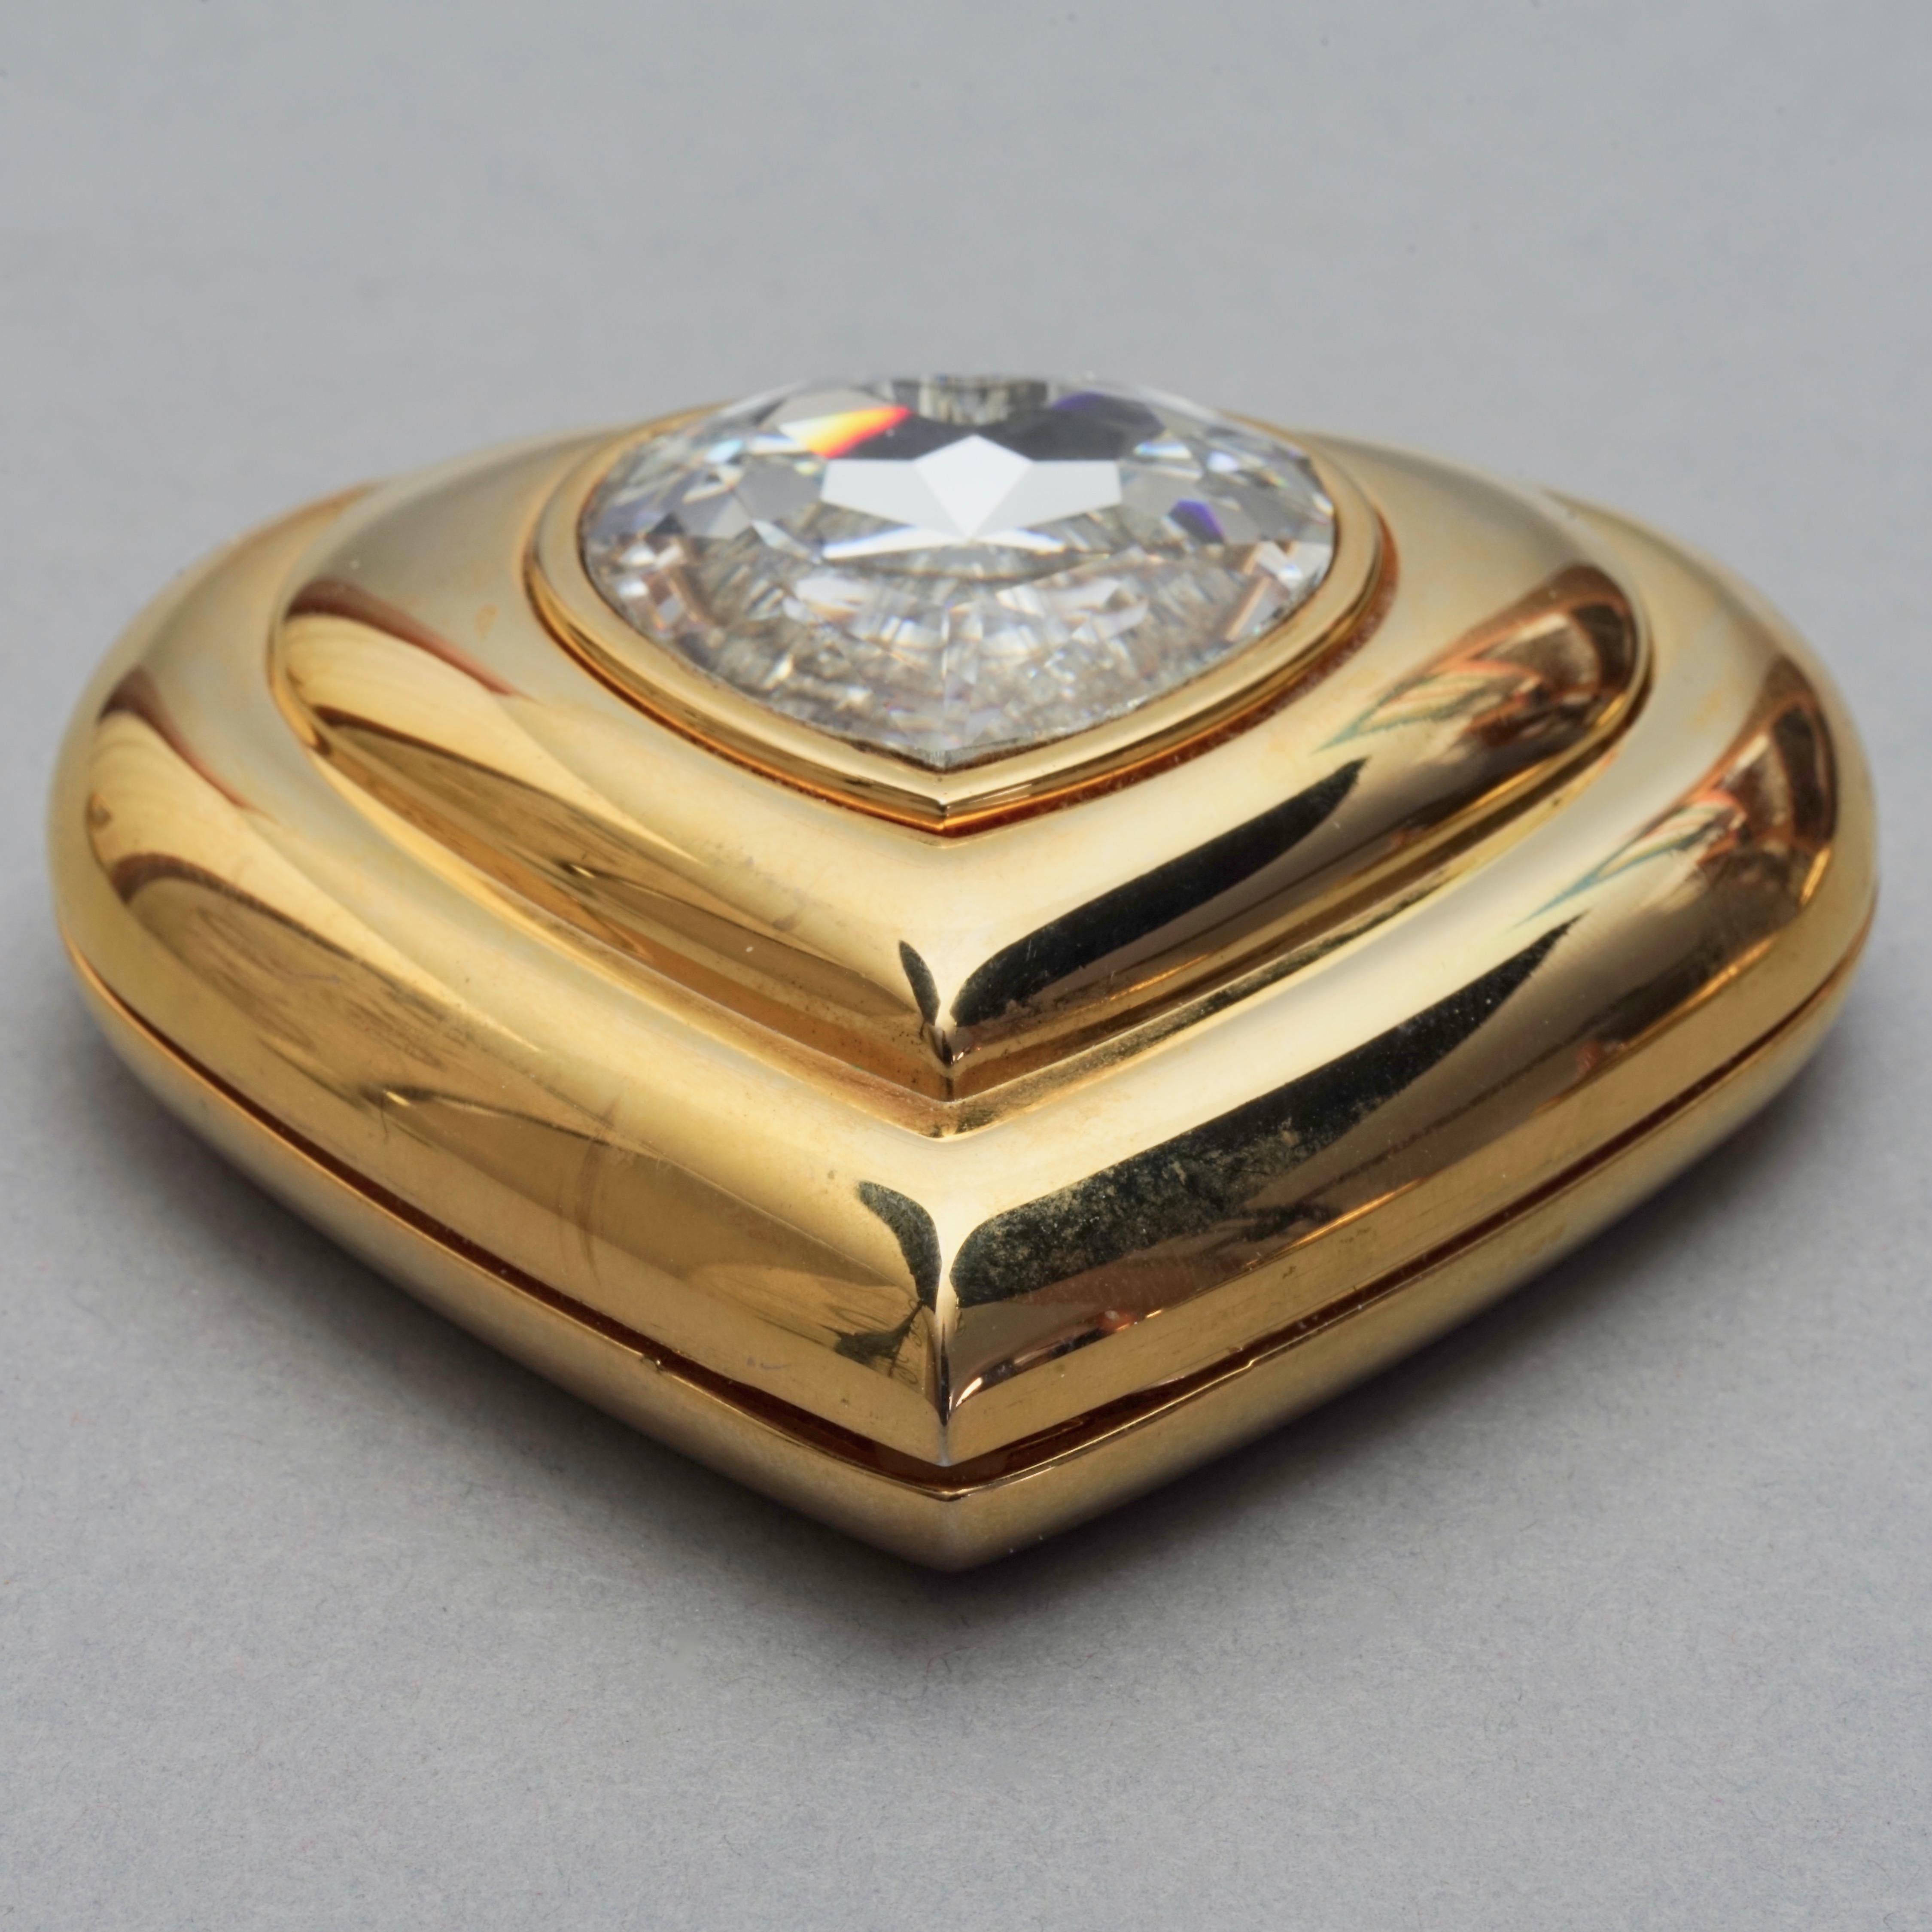 Vintage YVES SAINT LAURENT by Robert Goossens Heart Jewelled Compact Powder In Good Condition For Sale In Kingersheim, Alsace